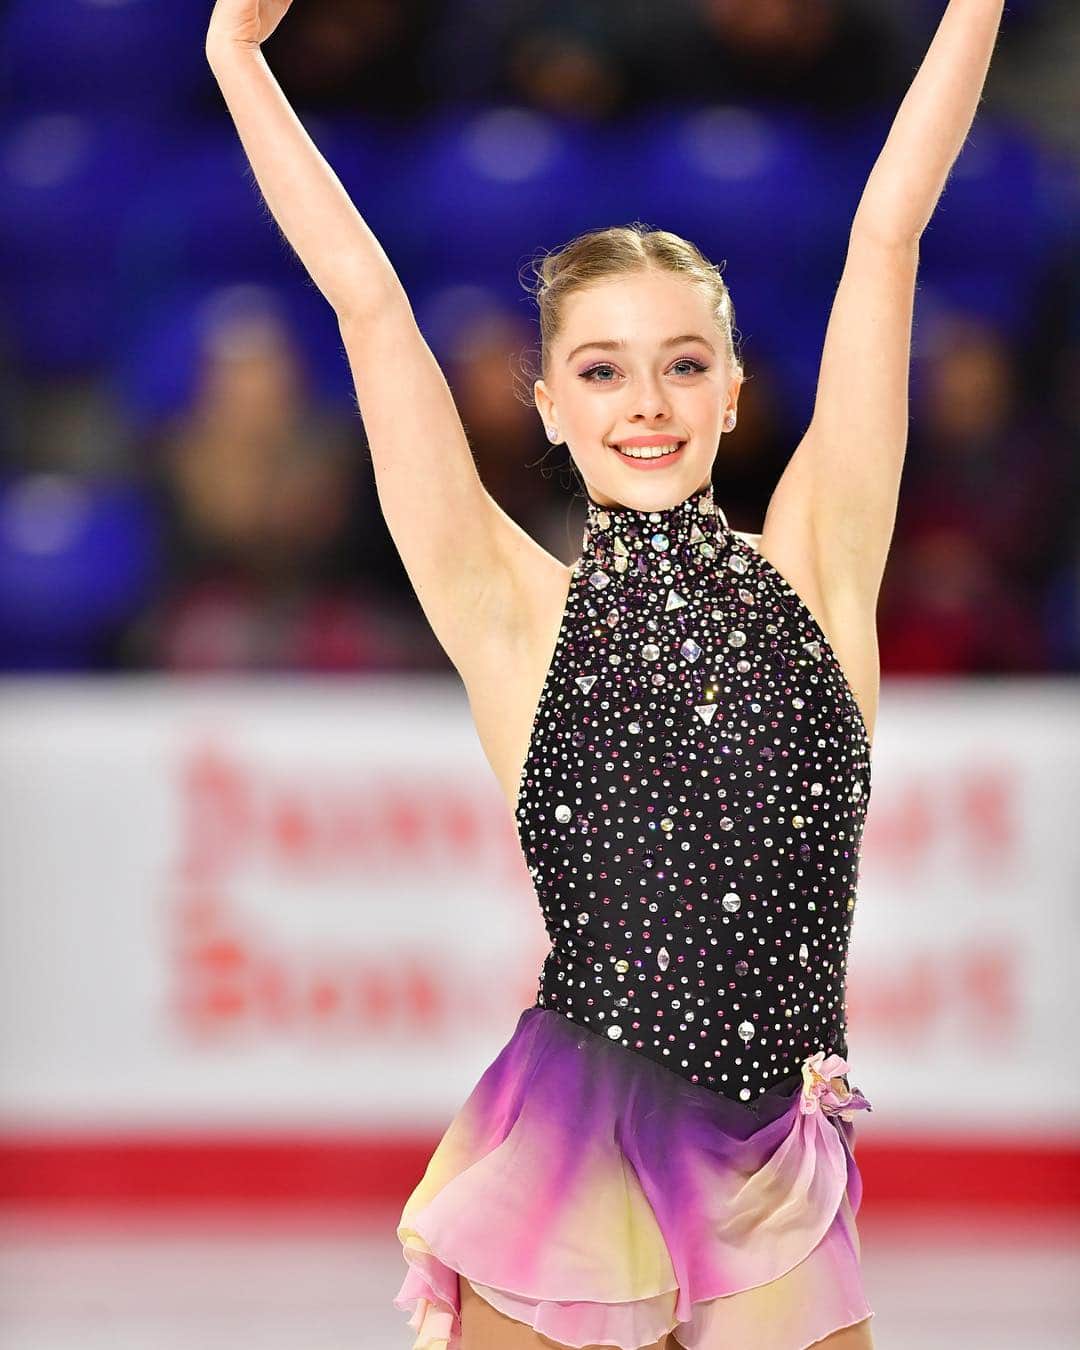 Justine Brasseurのインスタグラム：「Exactly 1 year ago I performed at Nationals in junior ladies and I’m really excited to be back this year but this time in Senior Pairs!! @mark_bardei and I can’t wait to skate at our first Nationals together!! Une belle semaine nous attend⛸❤️ merci @danielleearlphotography for the pictures💜」